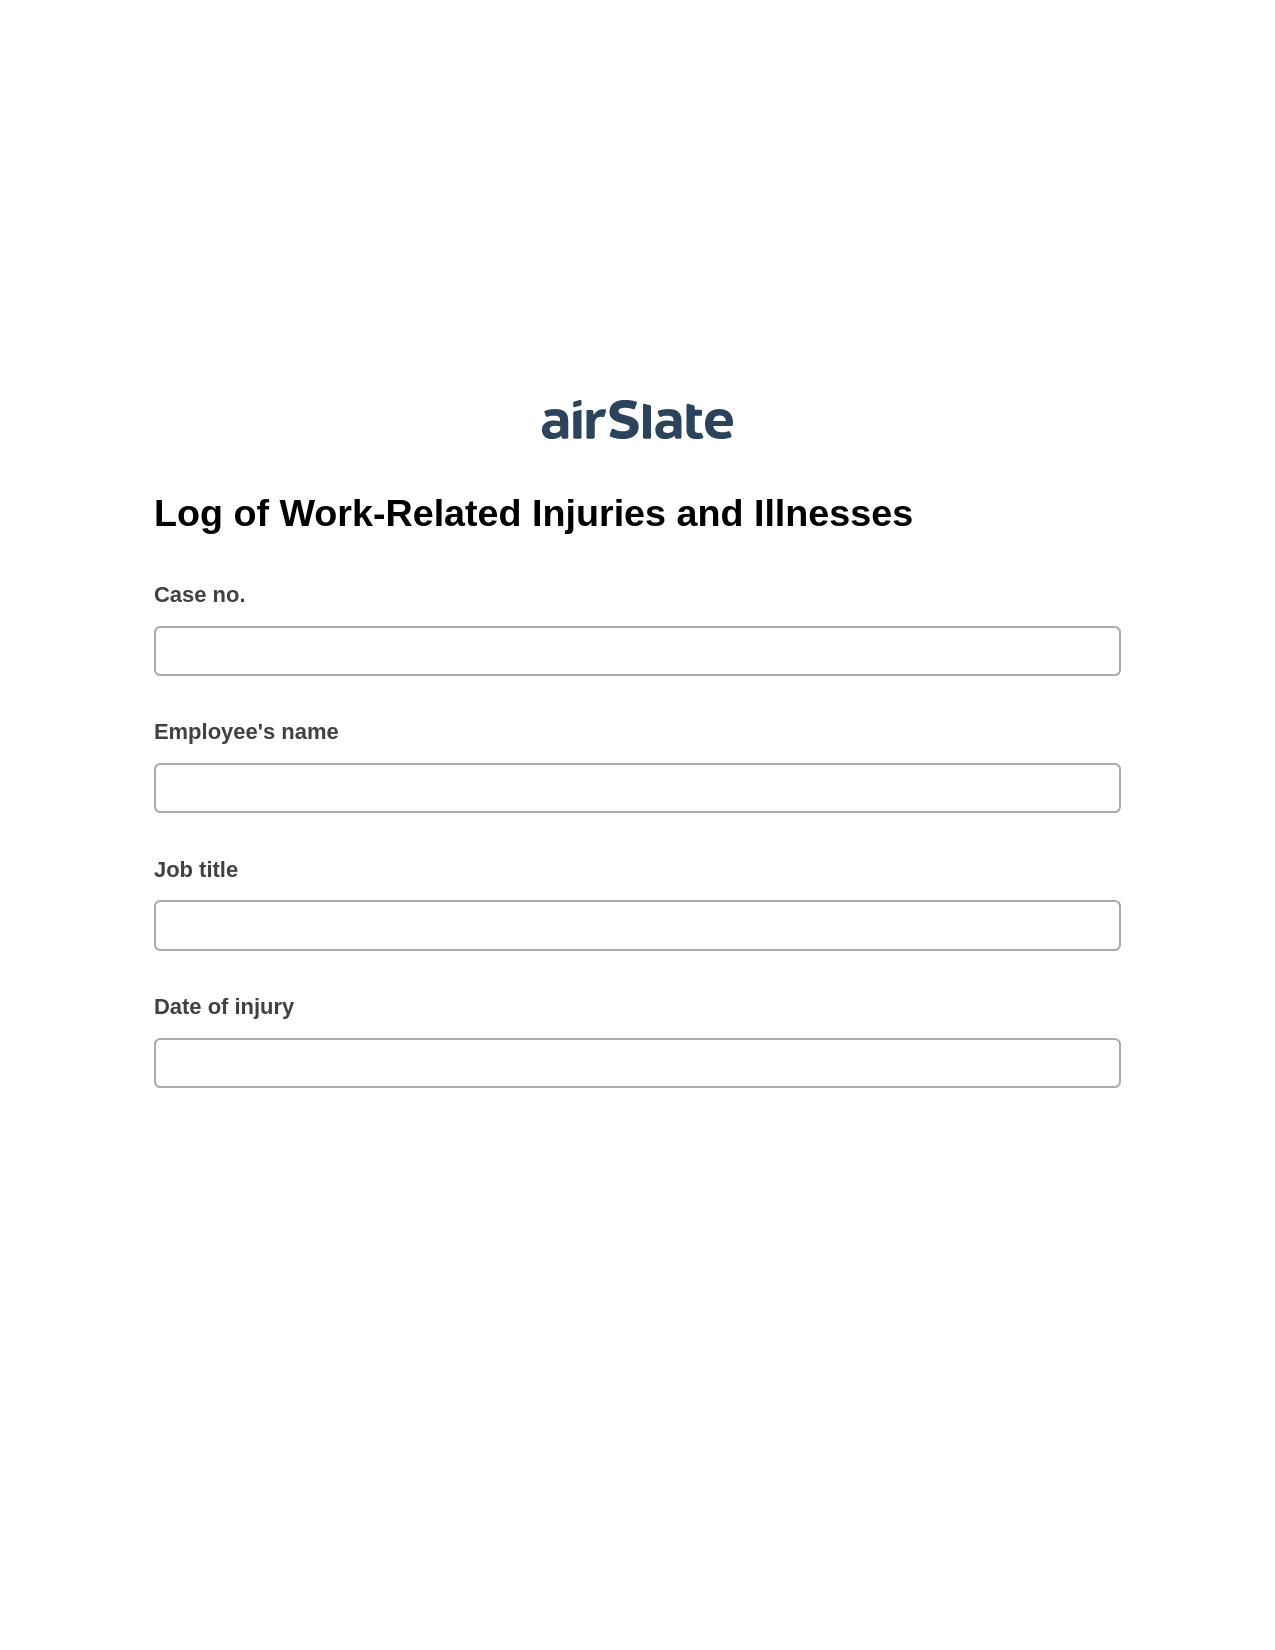 Multirole Log of Work-Related Injuries and Illnesses Pre-fill from NetSuite Records Bot, In-person Signing Bot, Slack Notification Postfinish Bot